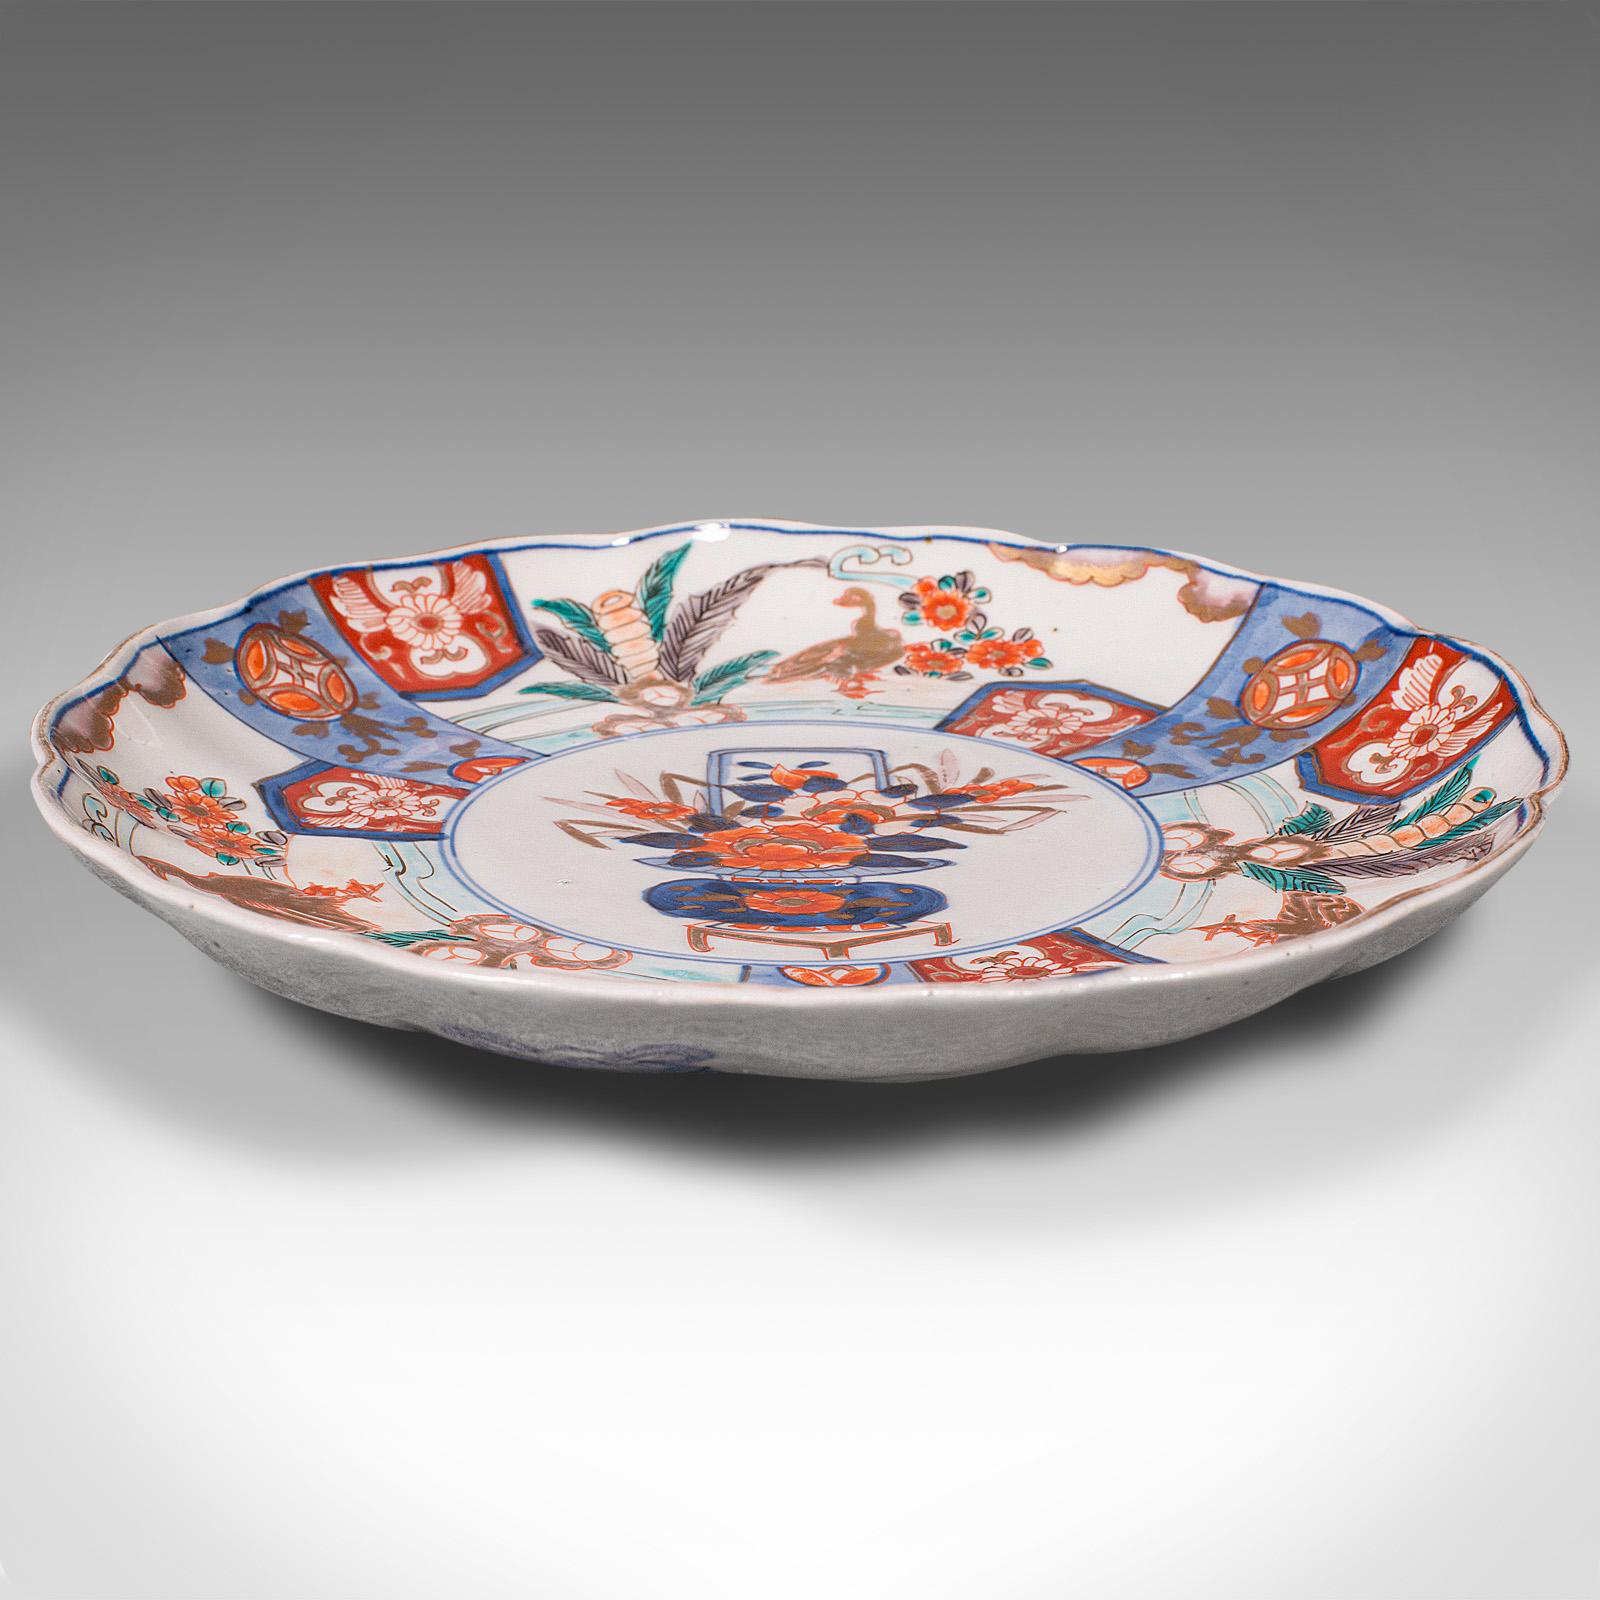 This is an antique Imari plate. A Japanese hand-painted ceramic serving dish, dating to the late Victorian period, circa 1900.

Charming example of Imari taste with appealing colour
Displays a desirable aged patina and in good order
White ground